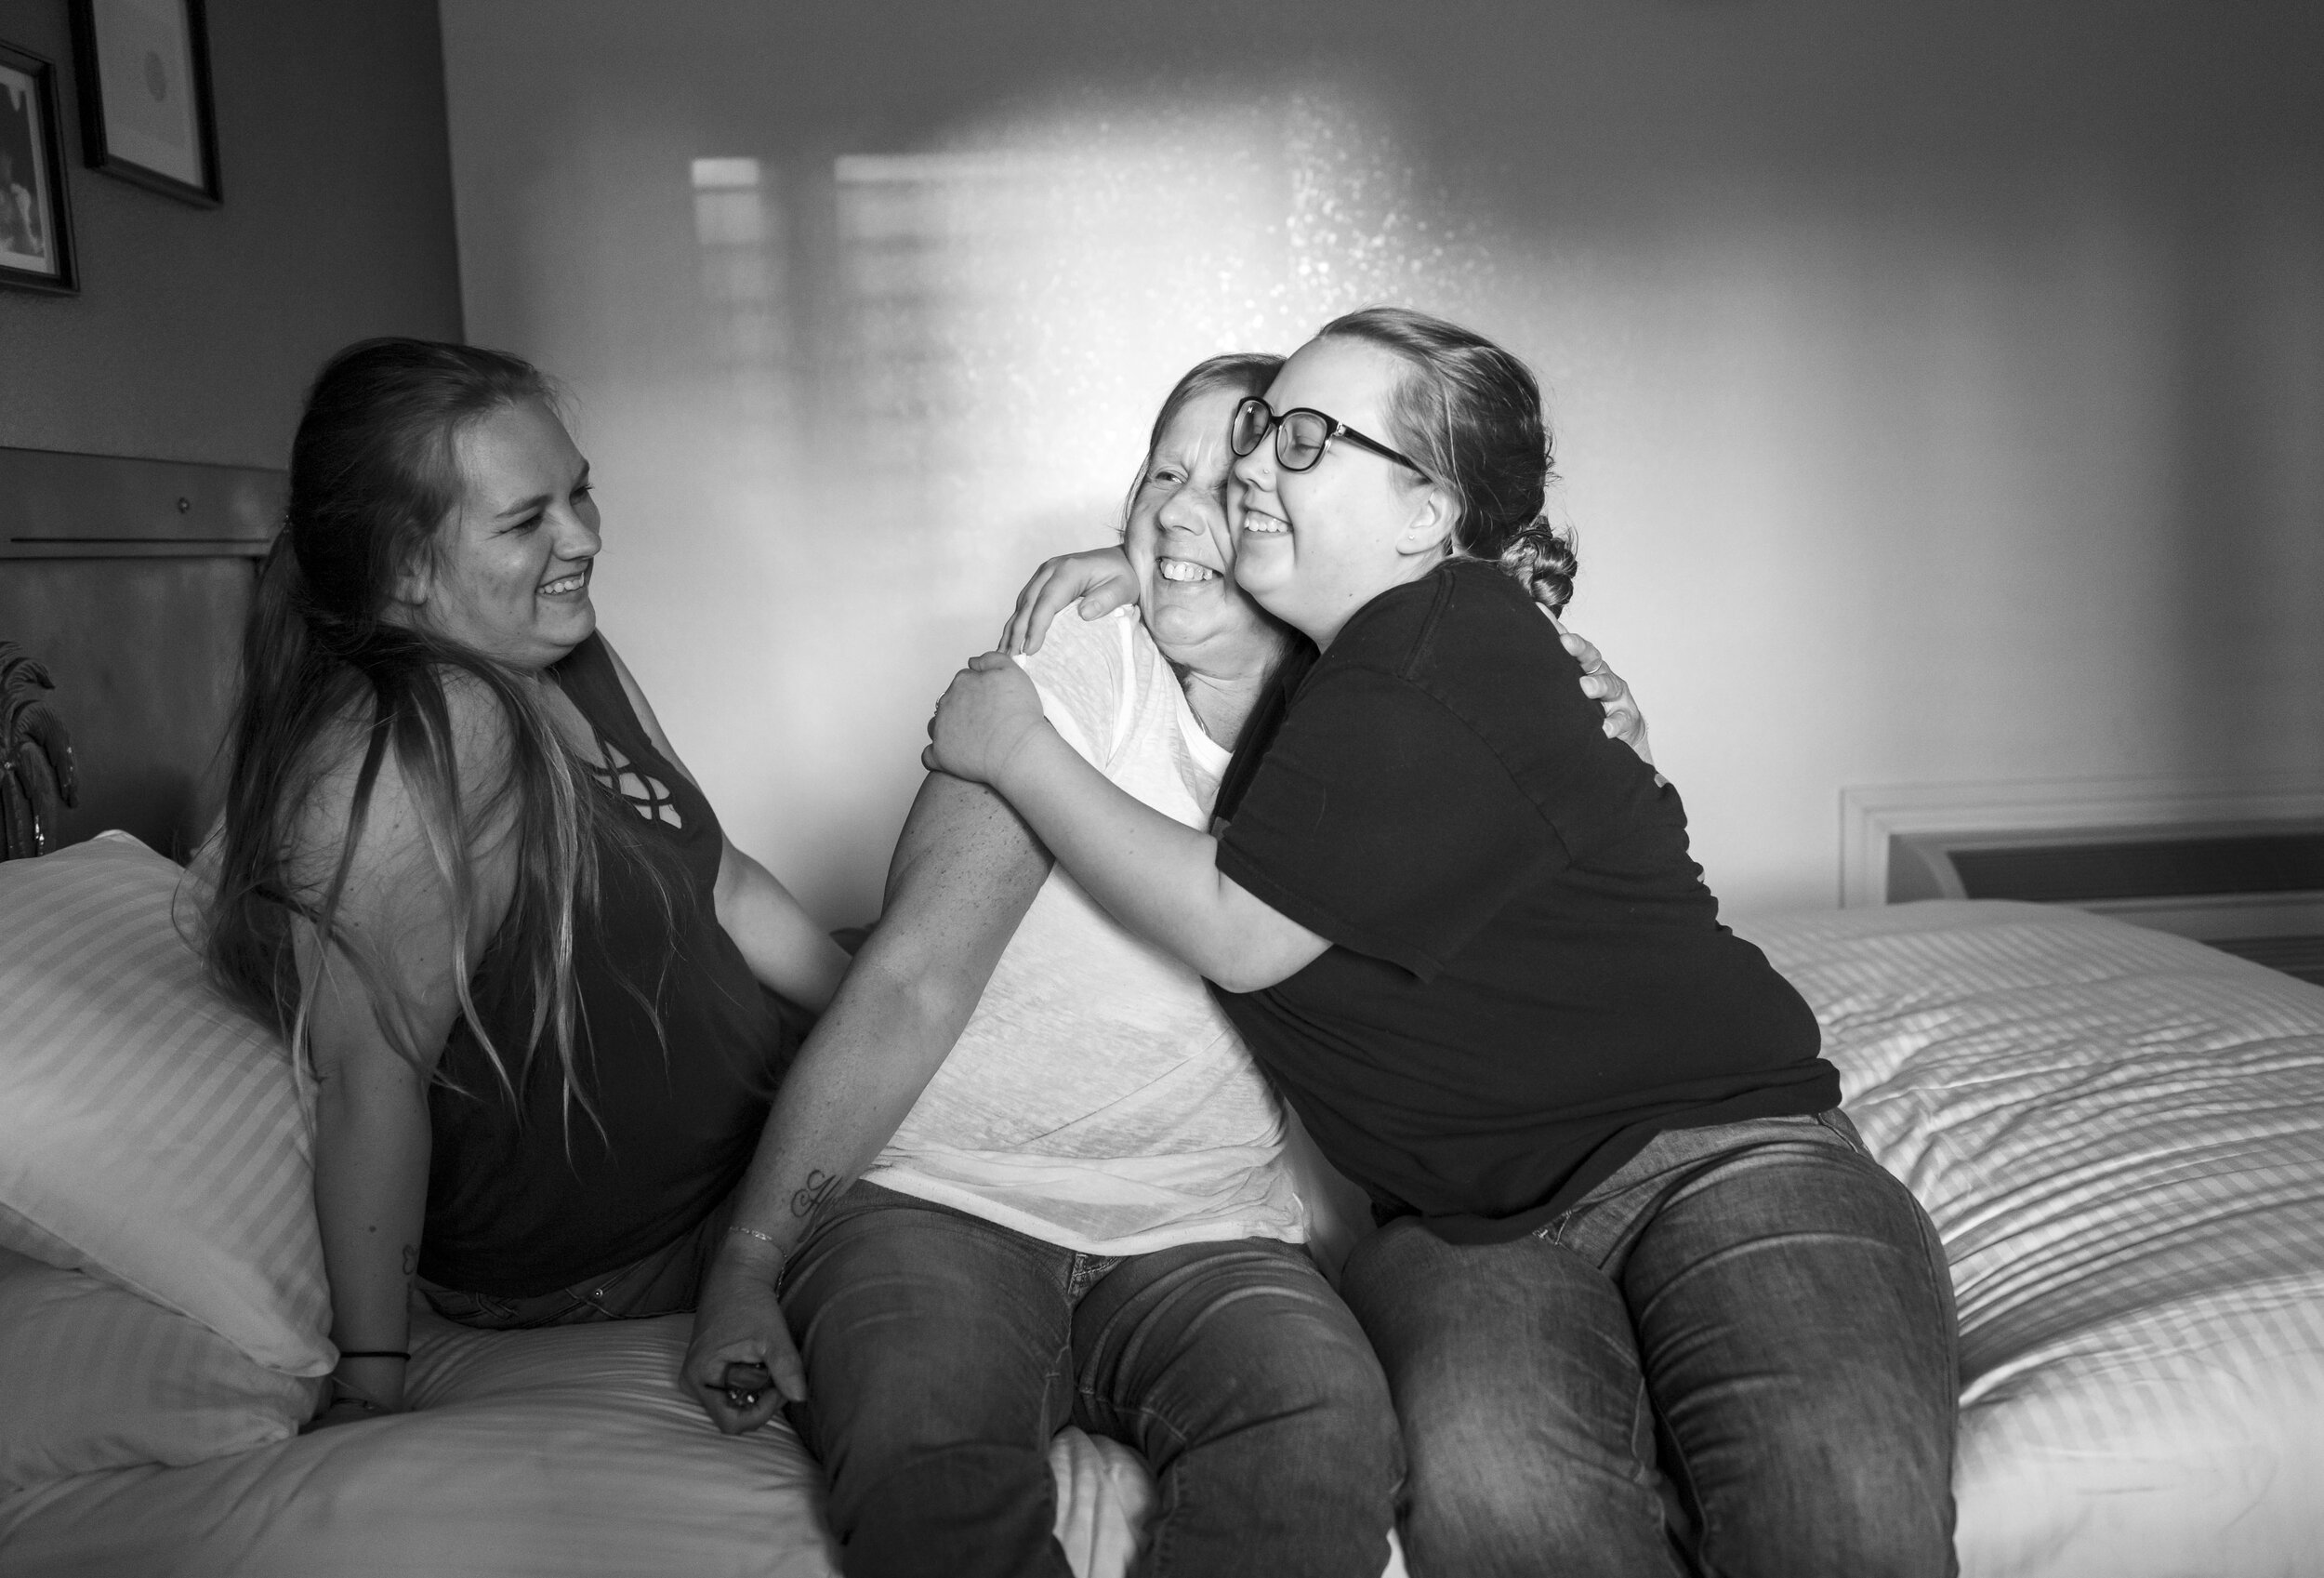 Sandy Holden and her daughters Tymika Lopez, left, and Shania Lopez, right, in a motel in Sacramento, California the night before Sandy’s breast reconstruction surgery